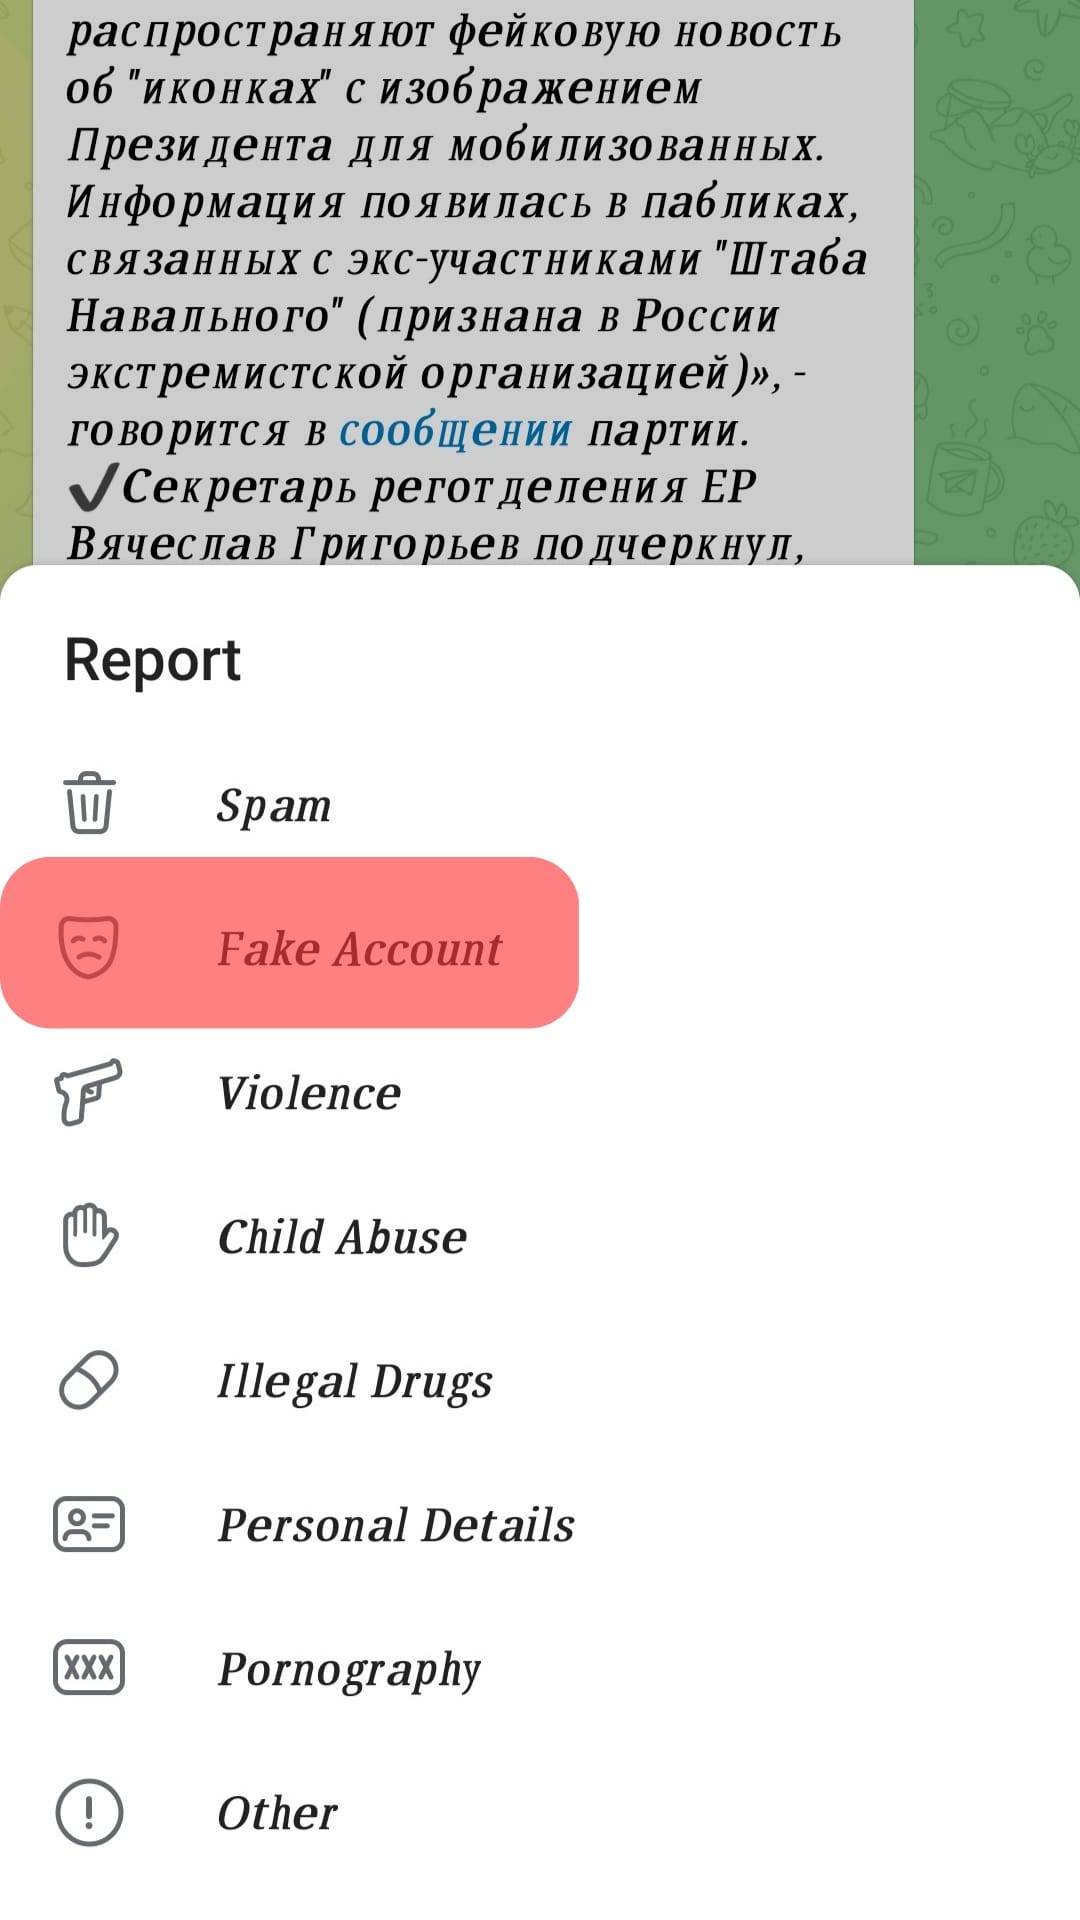 Add The Reason For Reporting